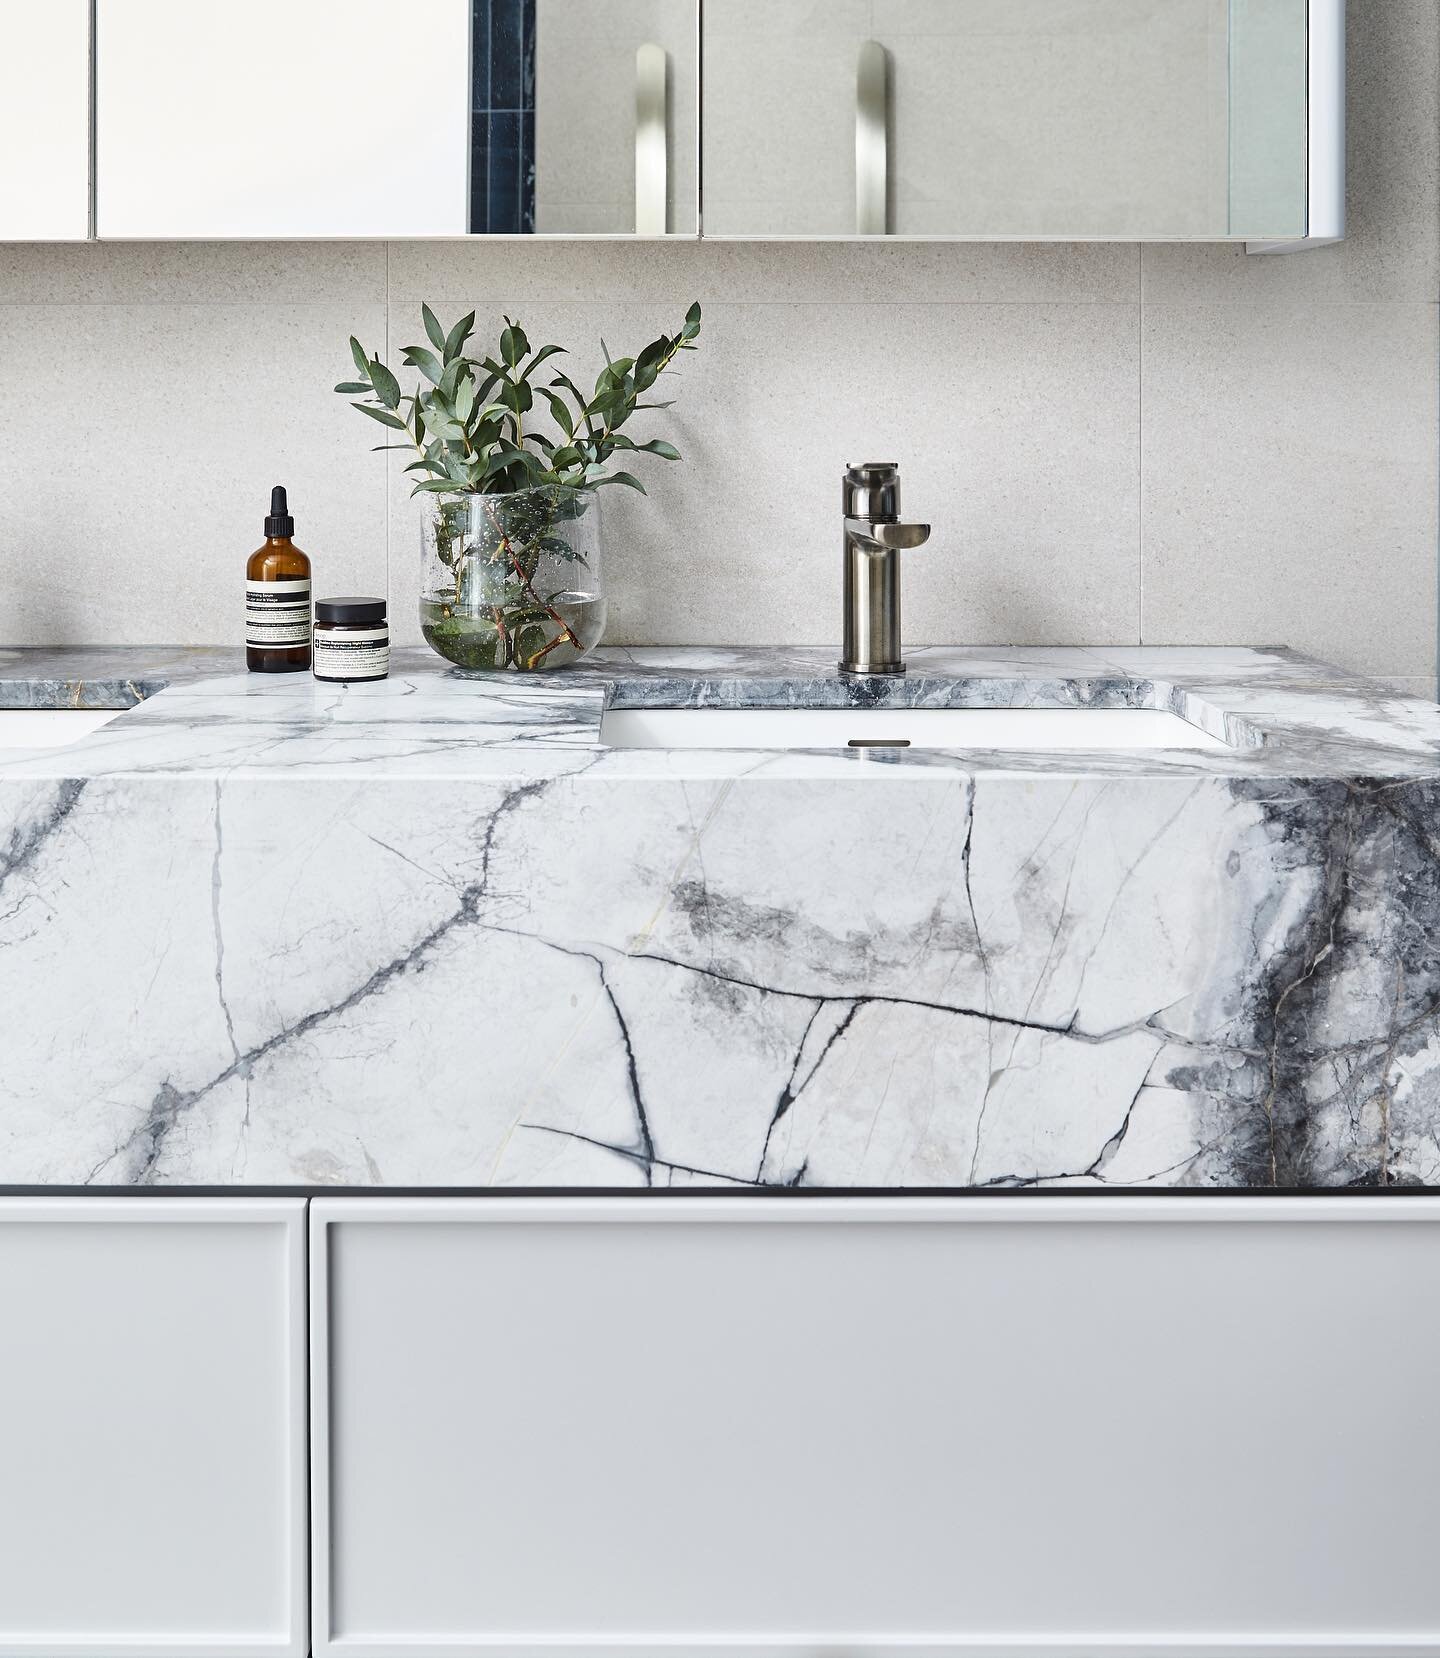 Bathroom details at the Rockley Residence in Rushcutters Bay featuring natural stone on the vanity, complemented by satin nickel tapware and a palette of soft grey tones and deep blue tiles.
Interior Design: @michaelallsoppdesign 
Builder: @acumencor